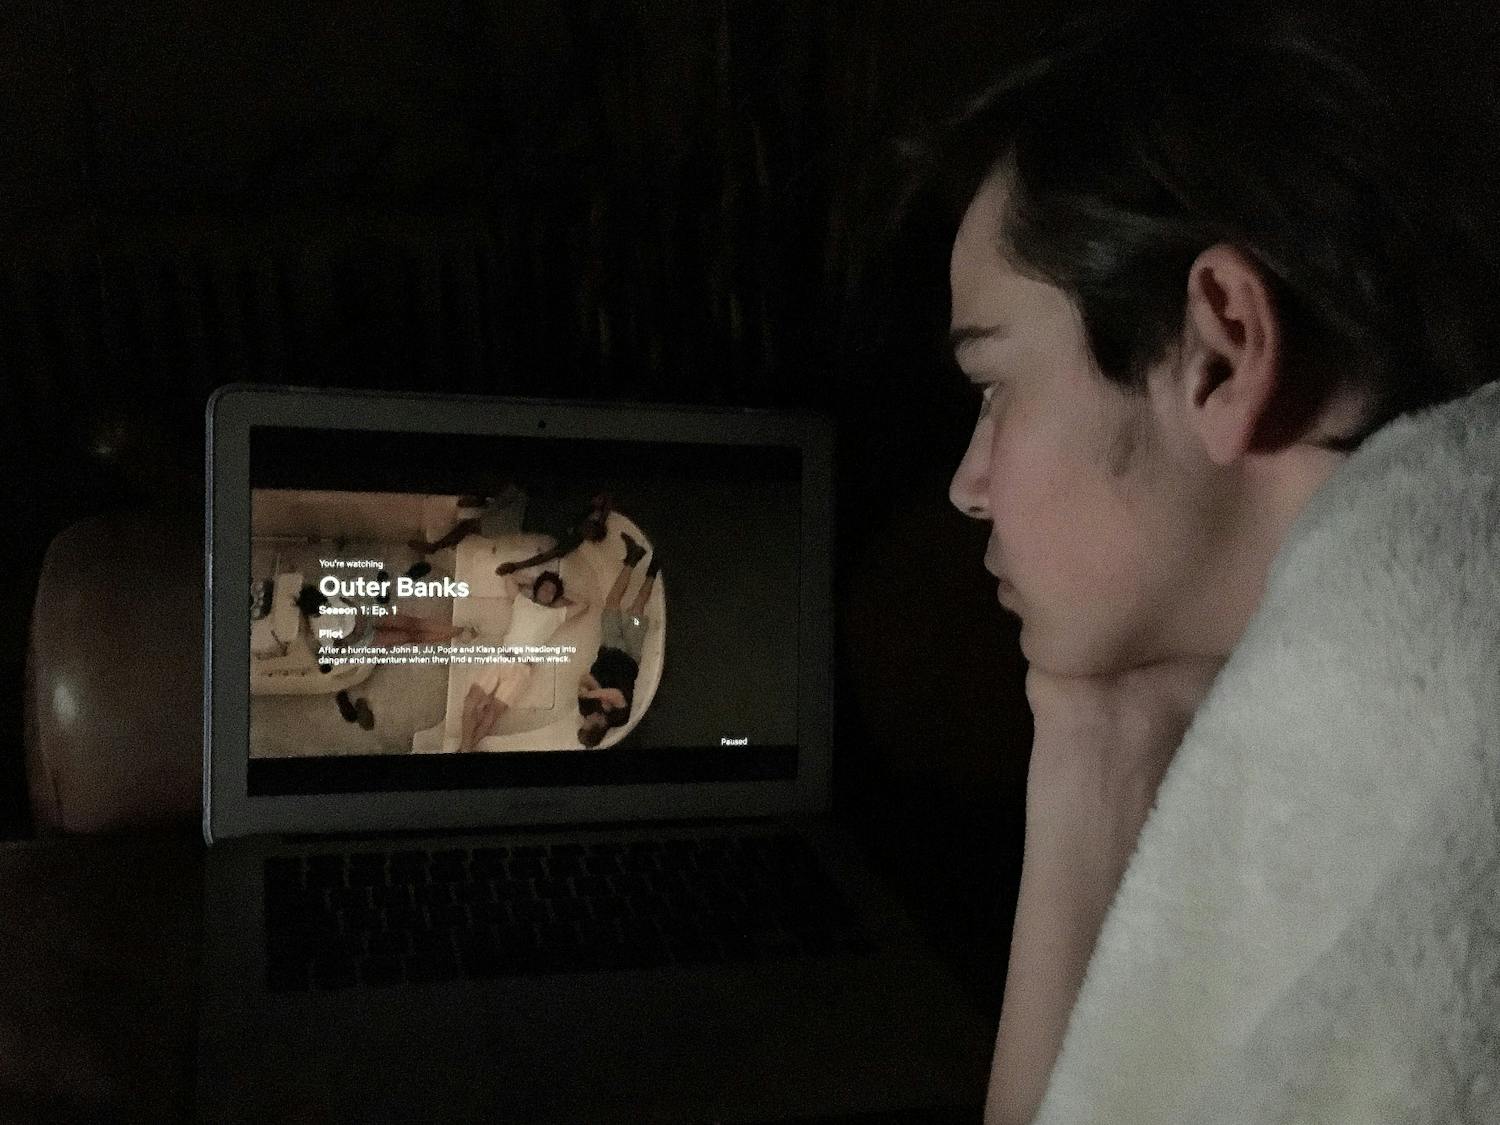 A student watches the Netflix show "Outer Banks" on his computer on Monday, May 18, 2020. This hit show, created by two UNC alumni, was released on April 15 and has since risen to the top of Netflix TV ratings.